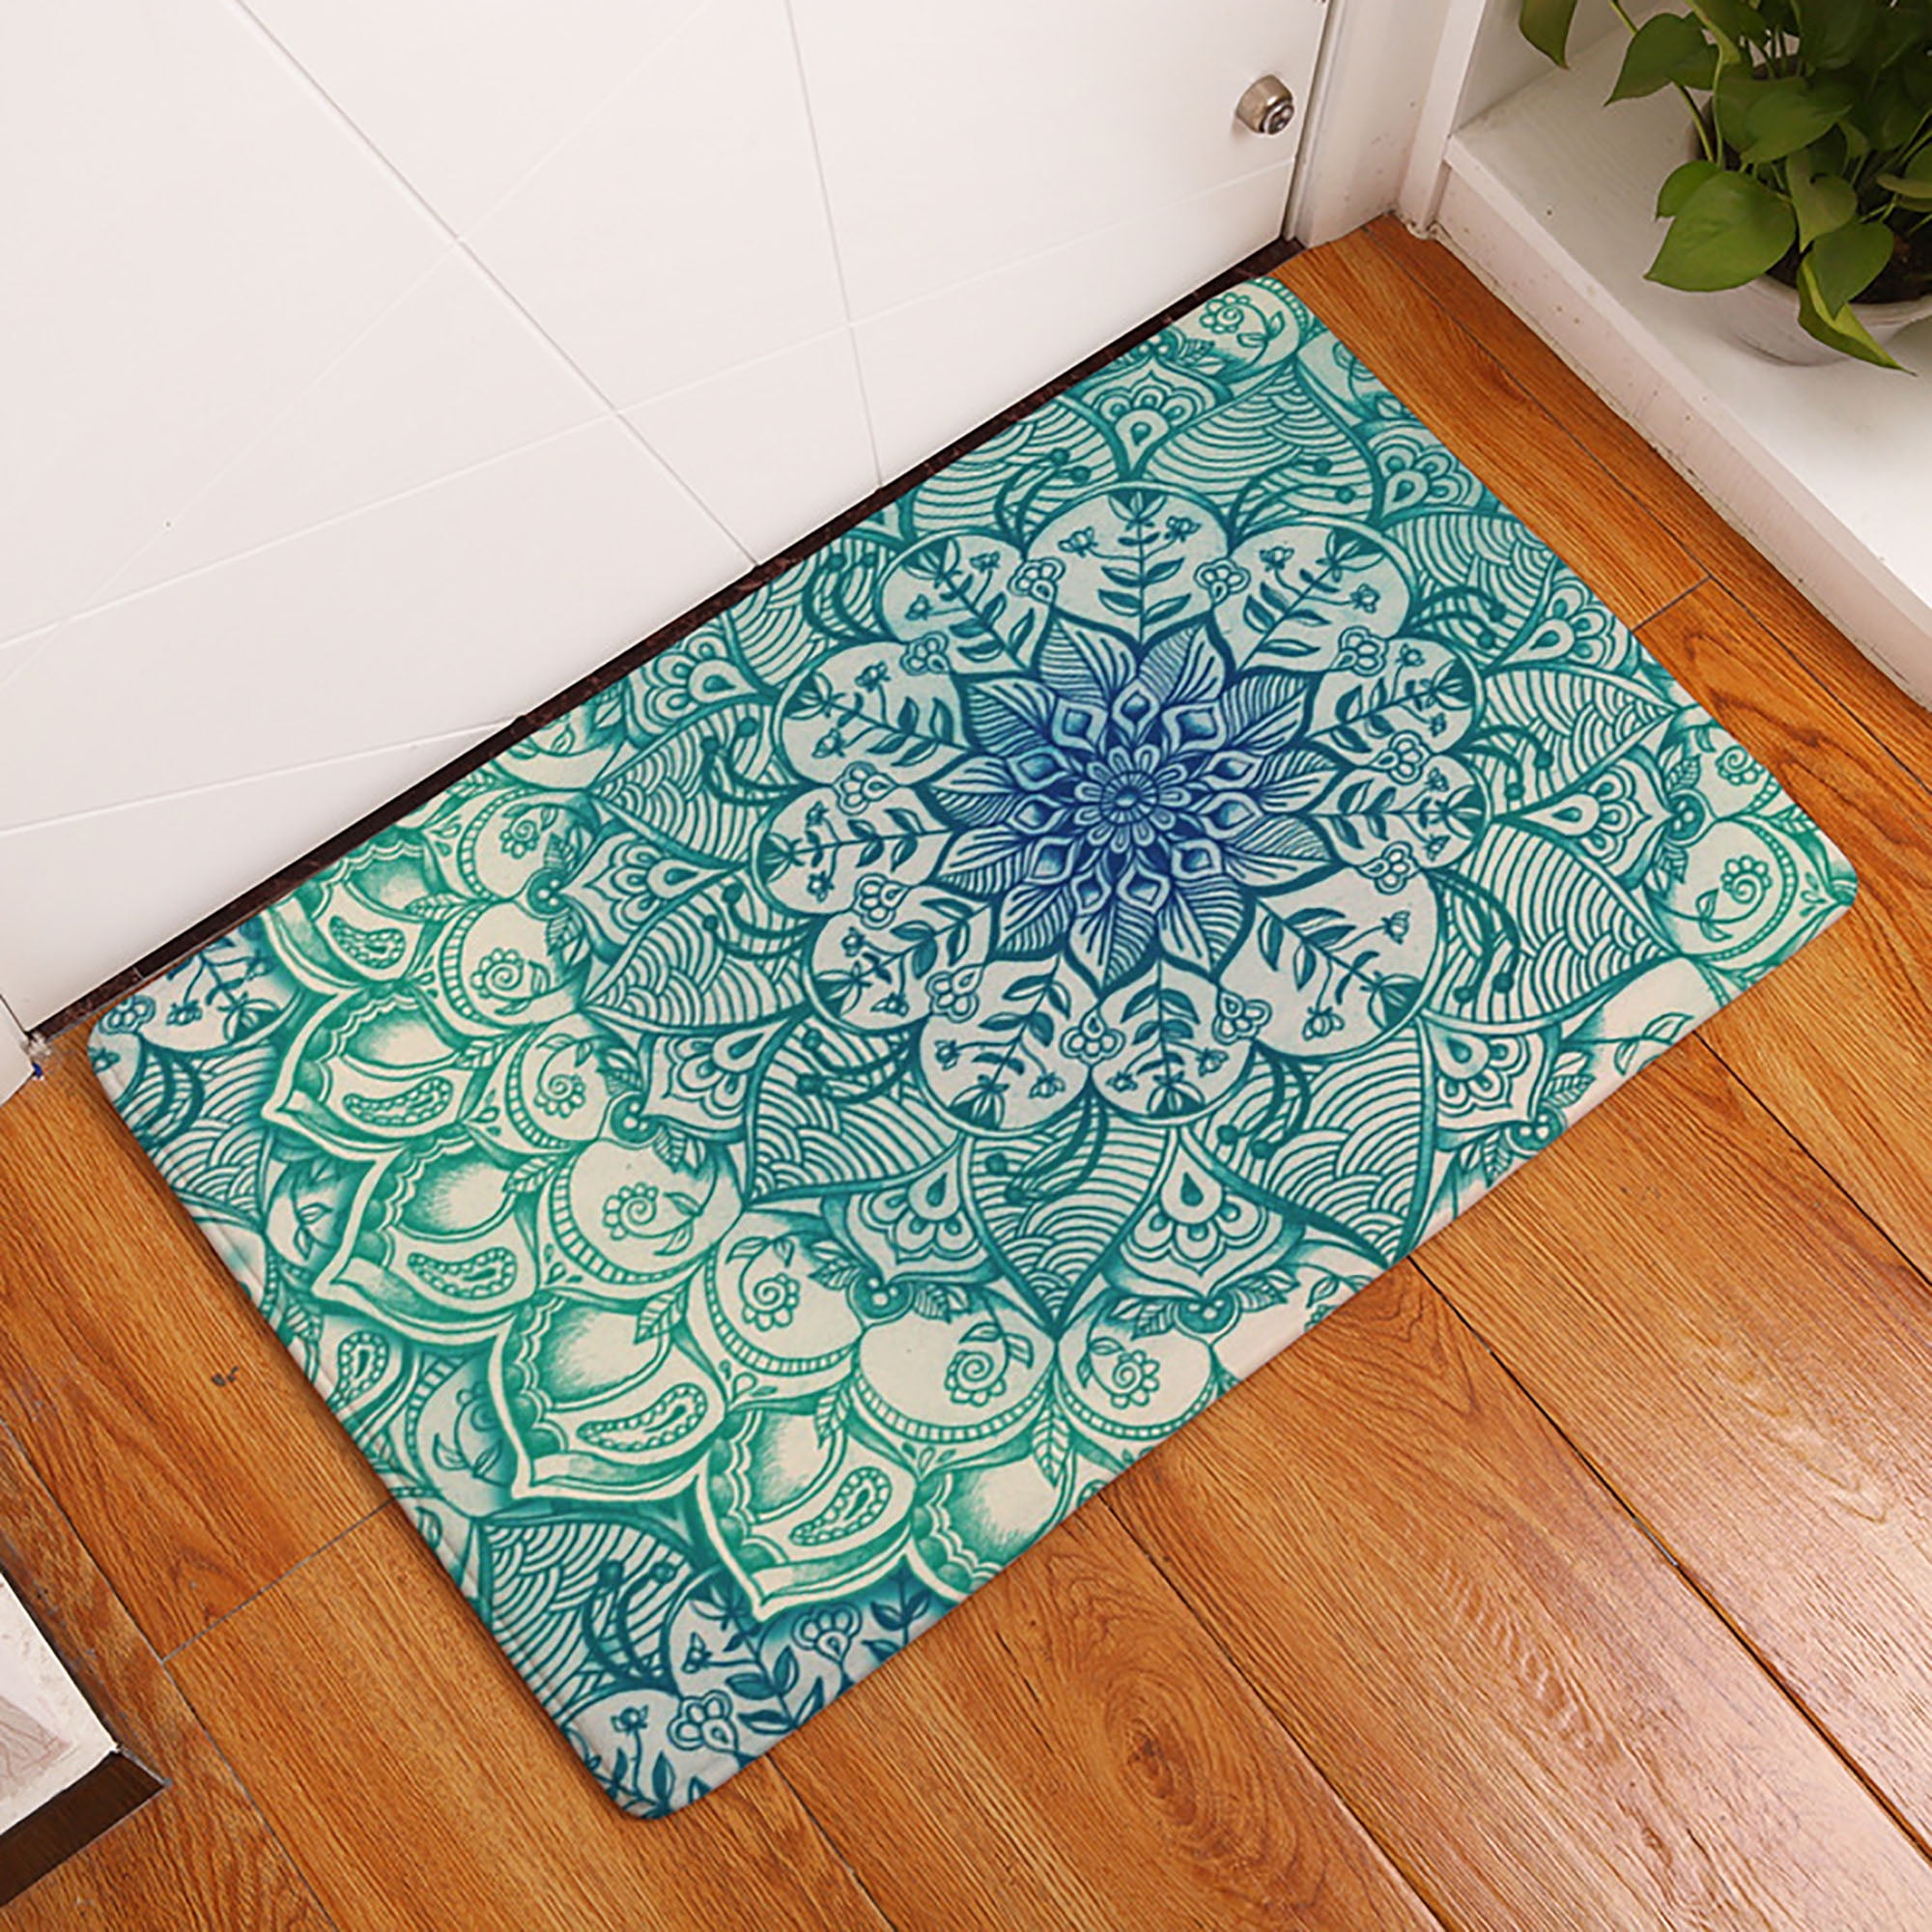 Seashells and Starfish On Blue Wooden Boards Door Mat Outdoors Indoor Rug Inside Front Outdoor Non-Slip Washable for Entryway Carpet 40 X 60 